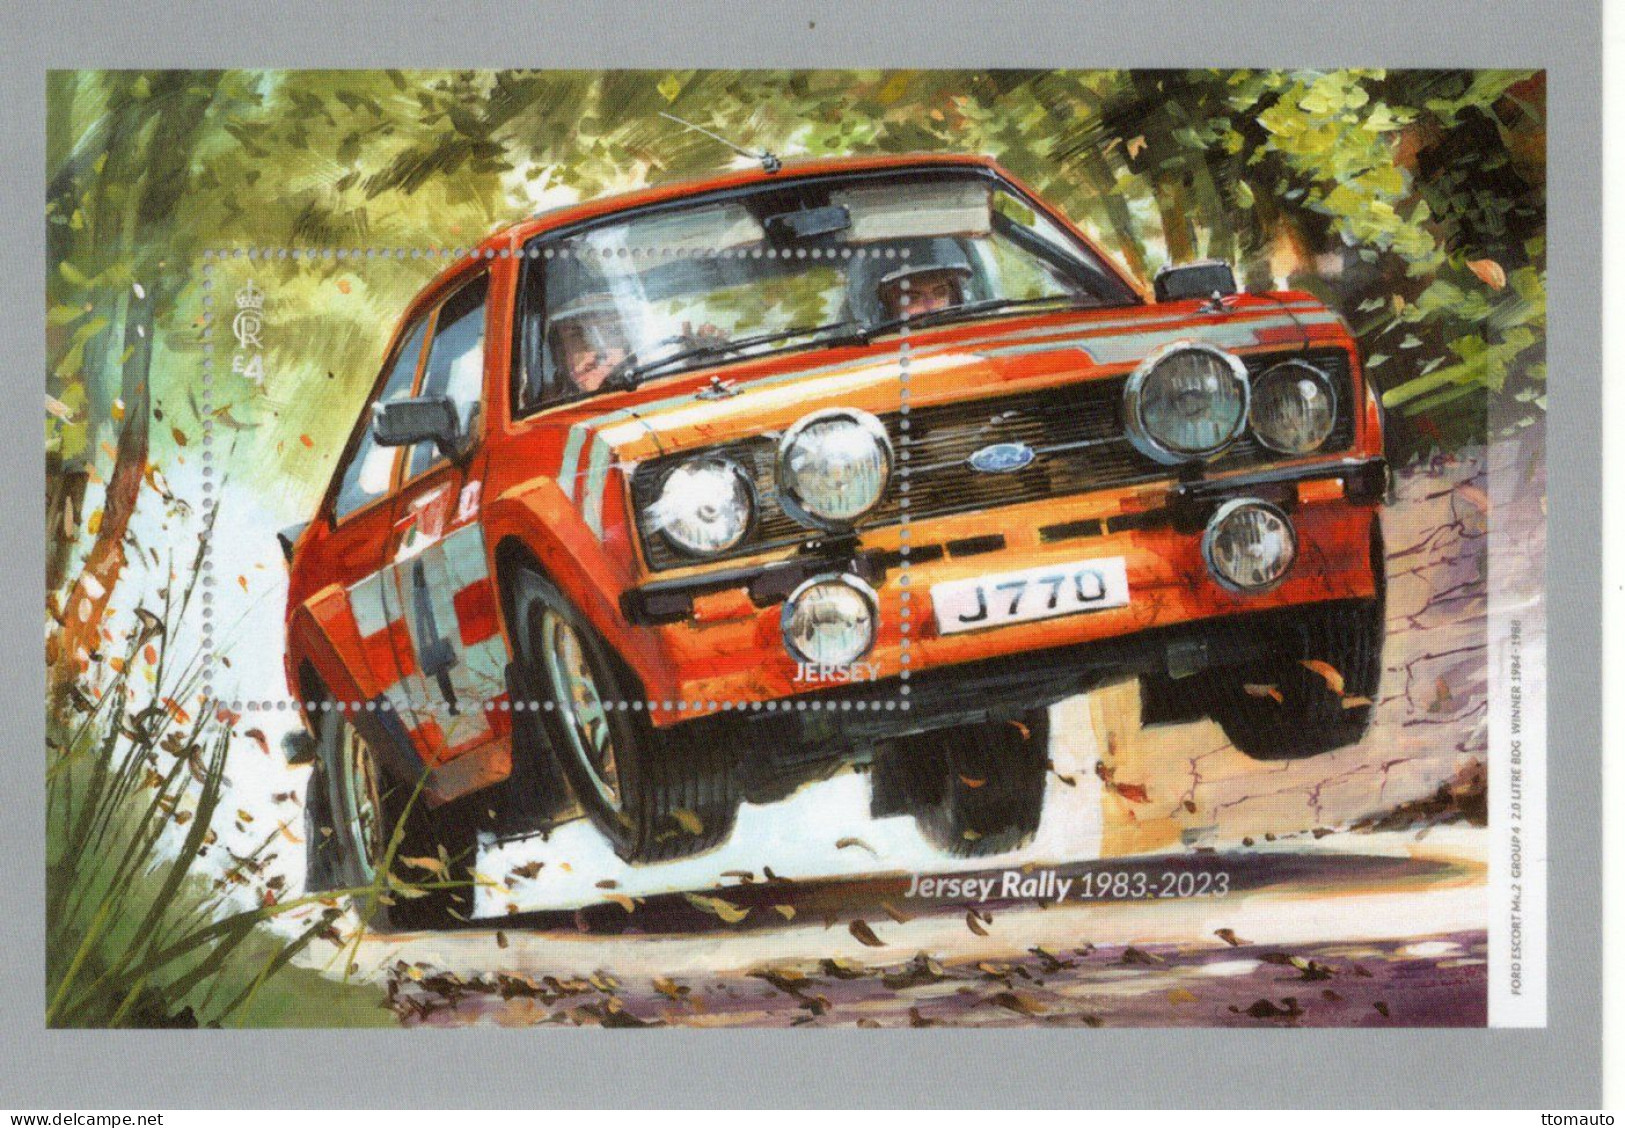 Ford Escort RS1800 -  40 Years Of Jersey Rally - Jersey PHQ Postcard - Rally